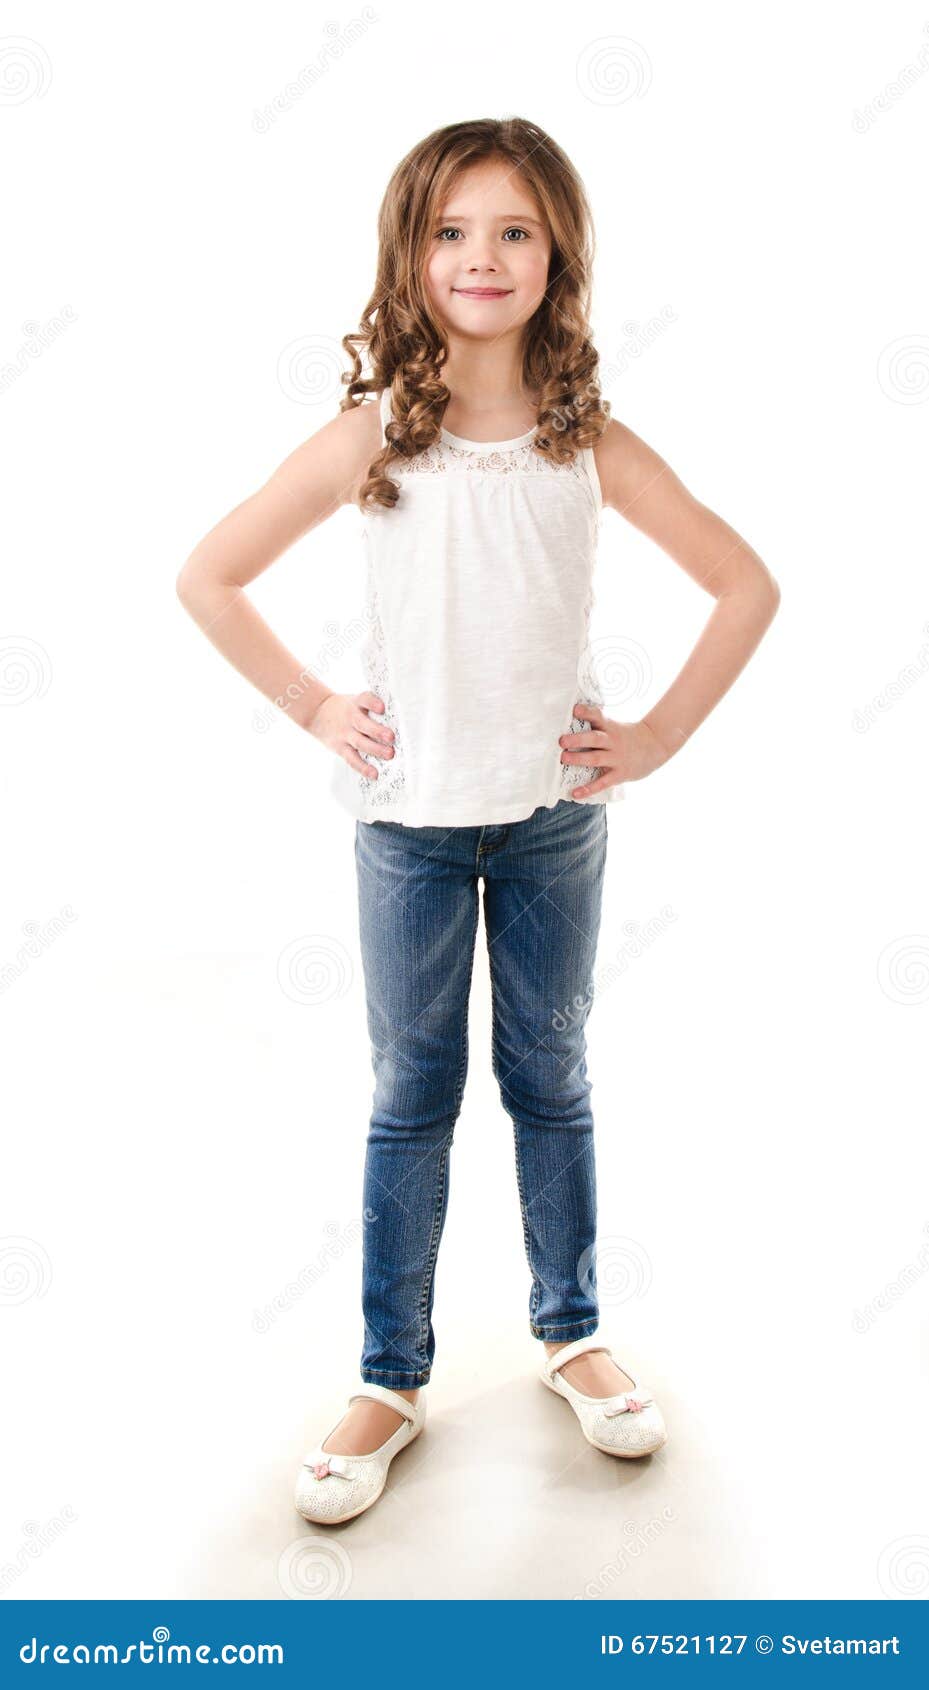 Portrait of Adorable Happy Little Girl in Jeans Stock Image - Image of ...